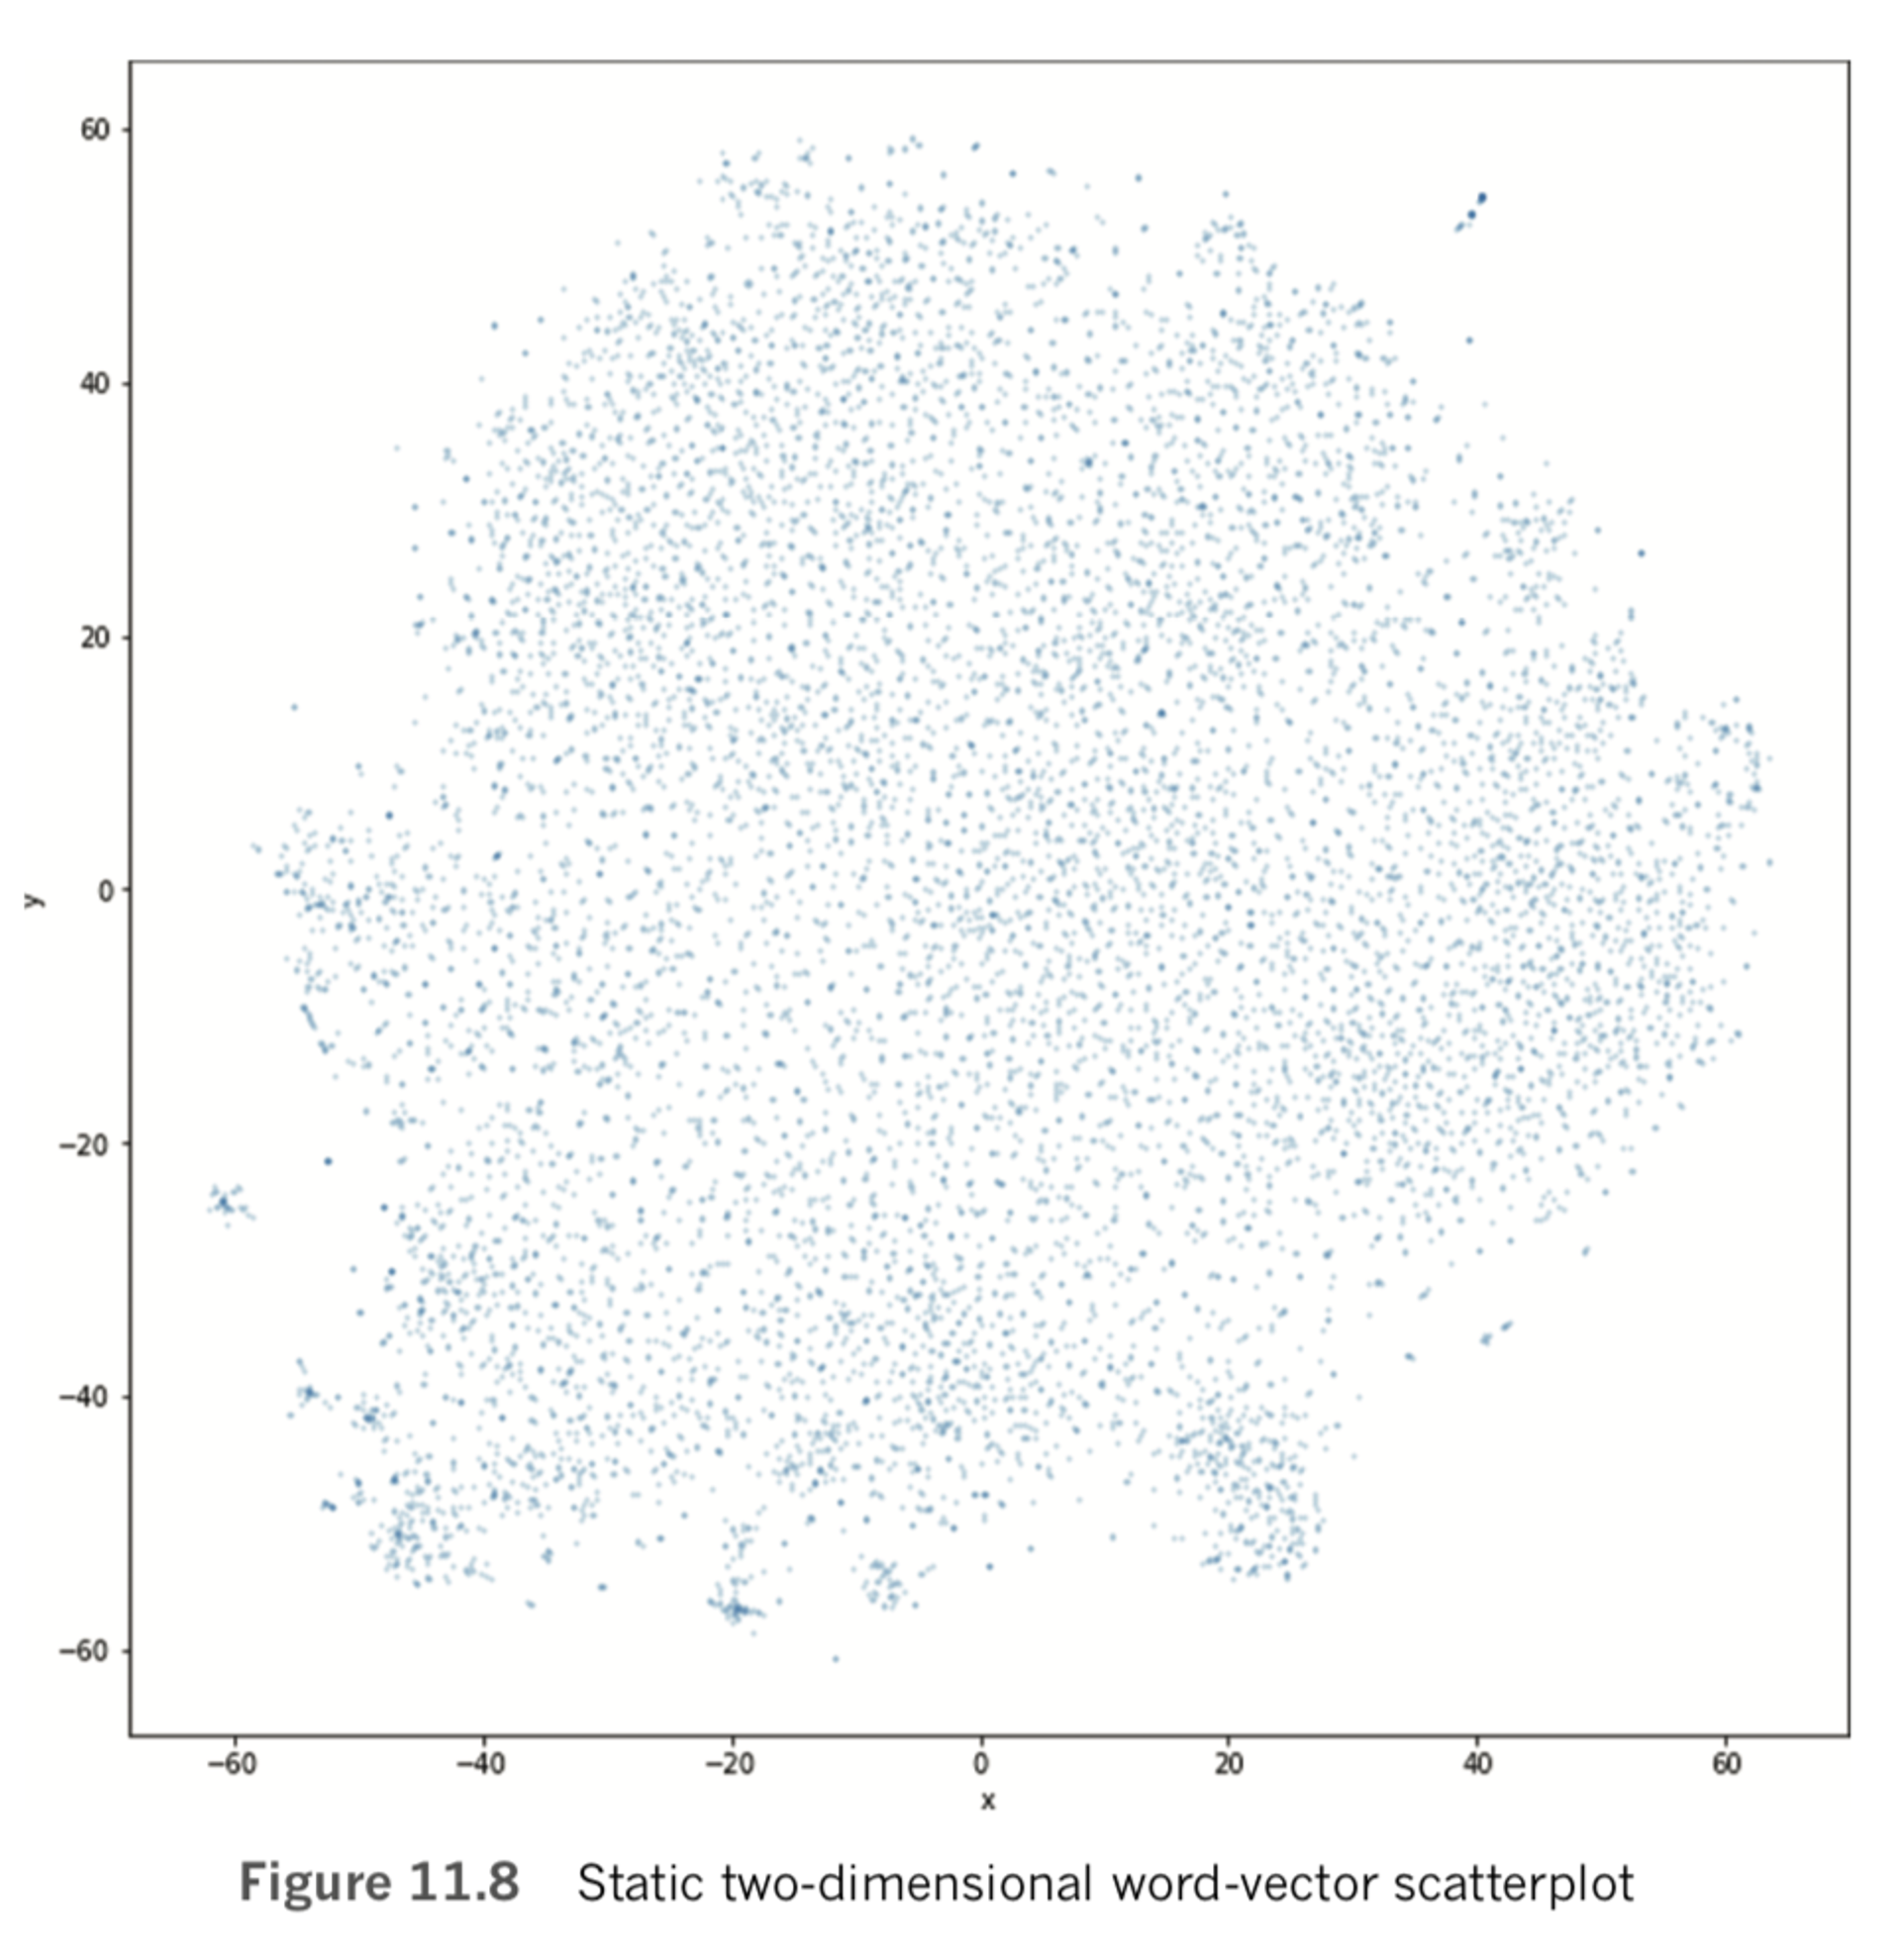 Static two-dimensional word-vector scatterplot